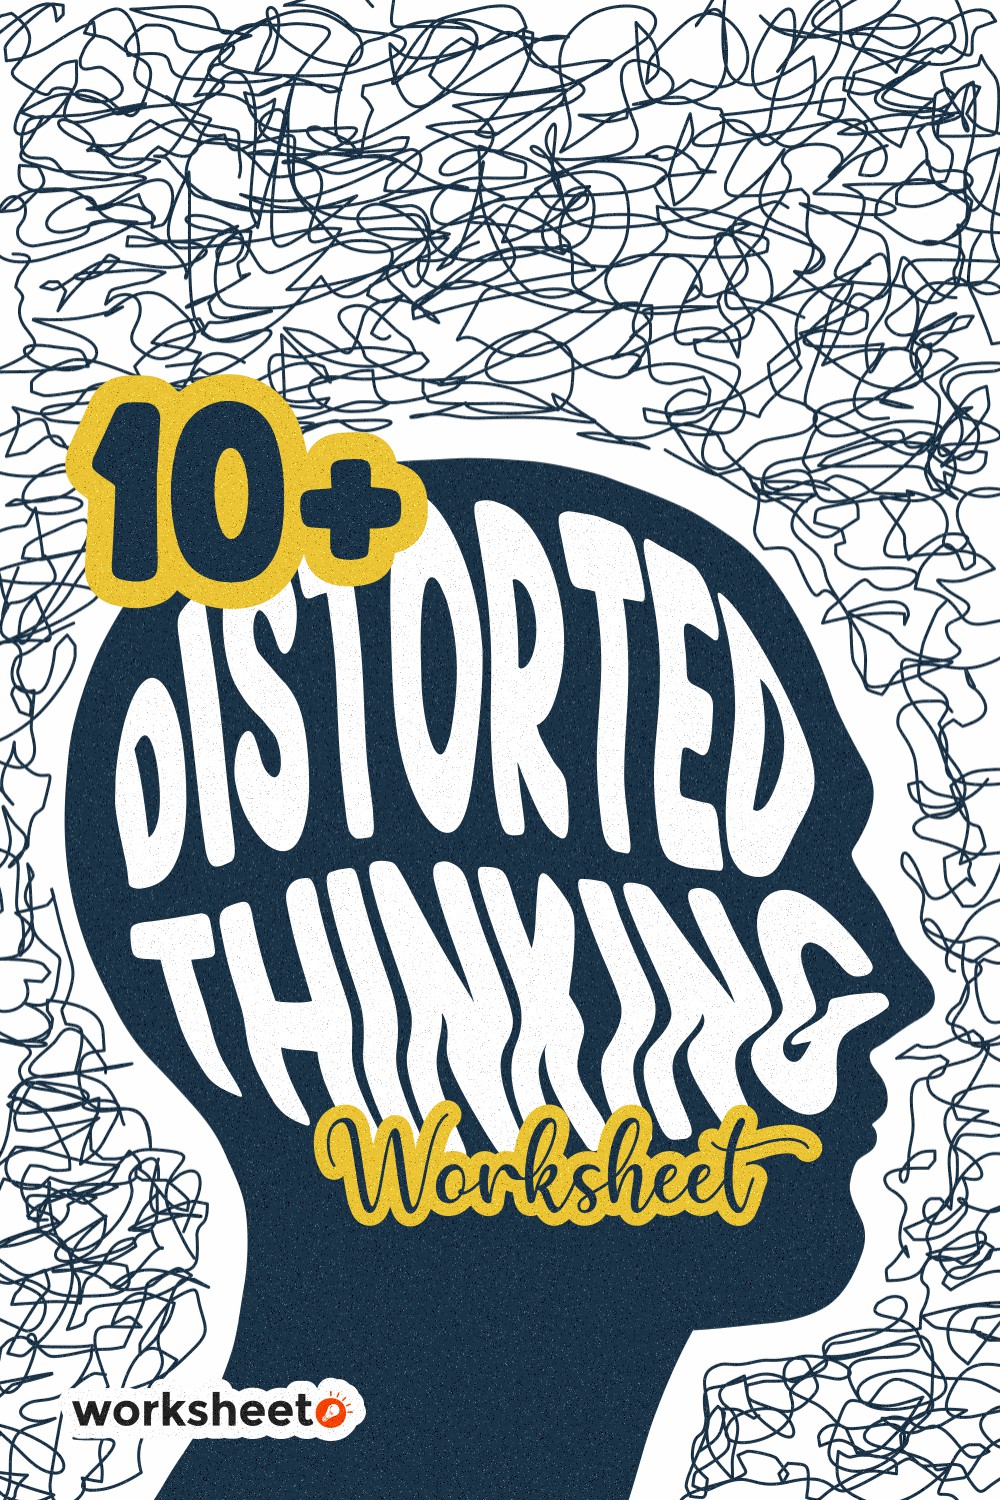 20 Images of Distorted Thinking Worksheet